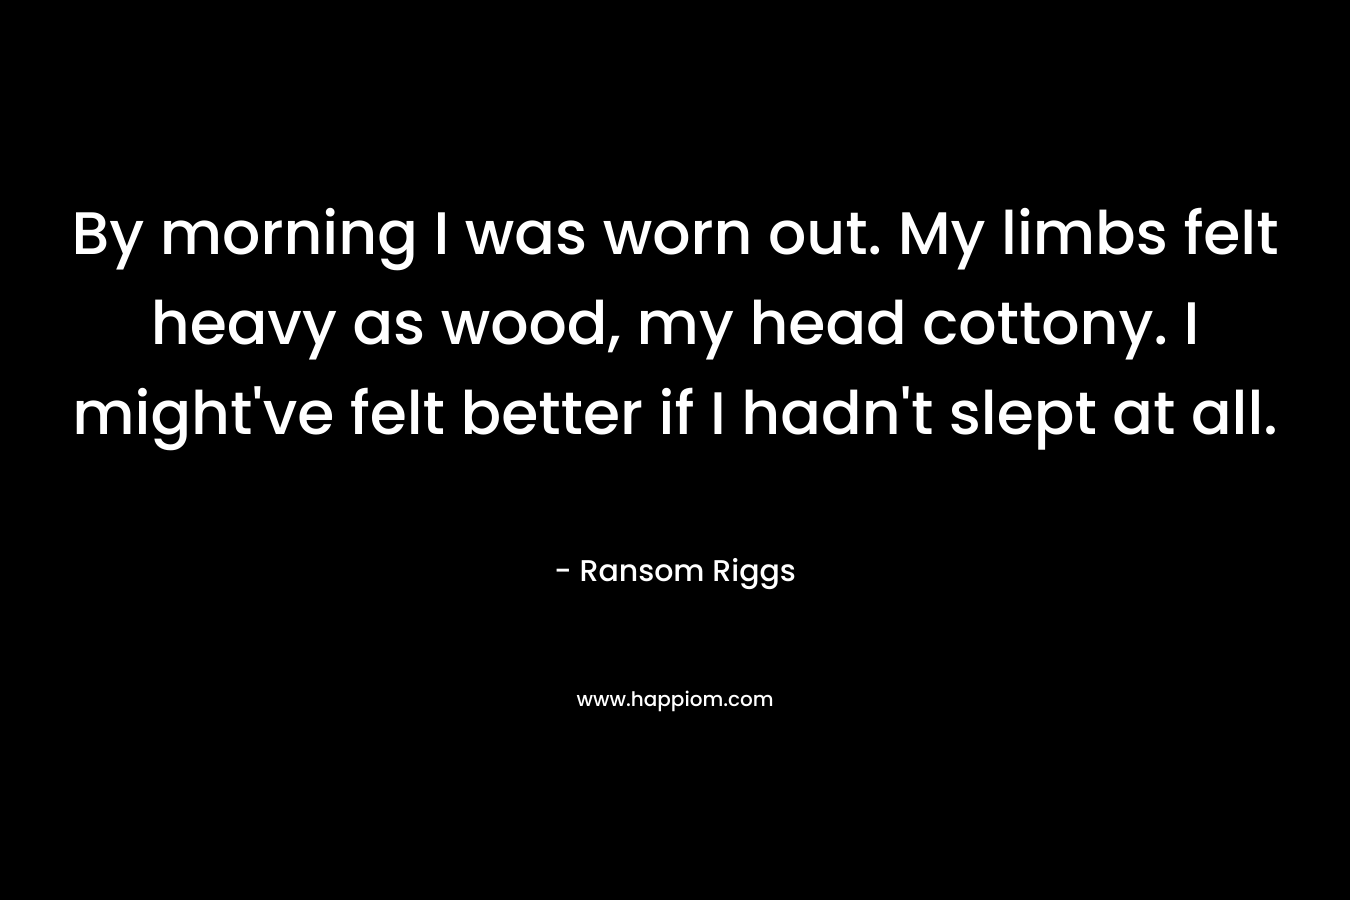 By morning I was worn out. My limbs felt heavy as wood, my head cottony. I might’ve felt better if I hadn’t slept at all. – Ransom Riggs